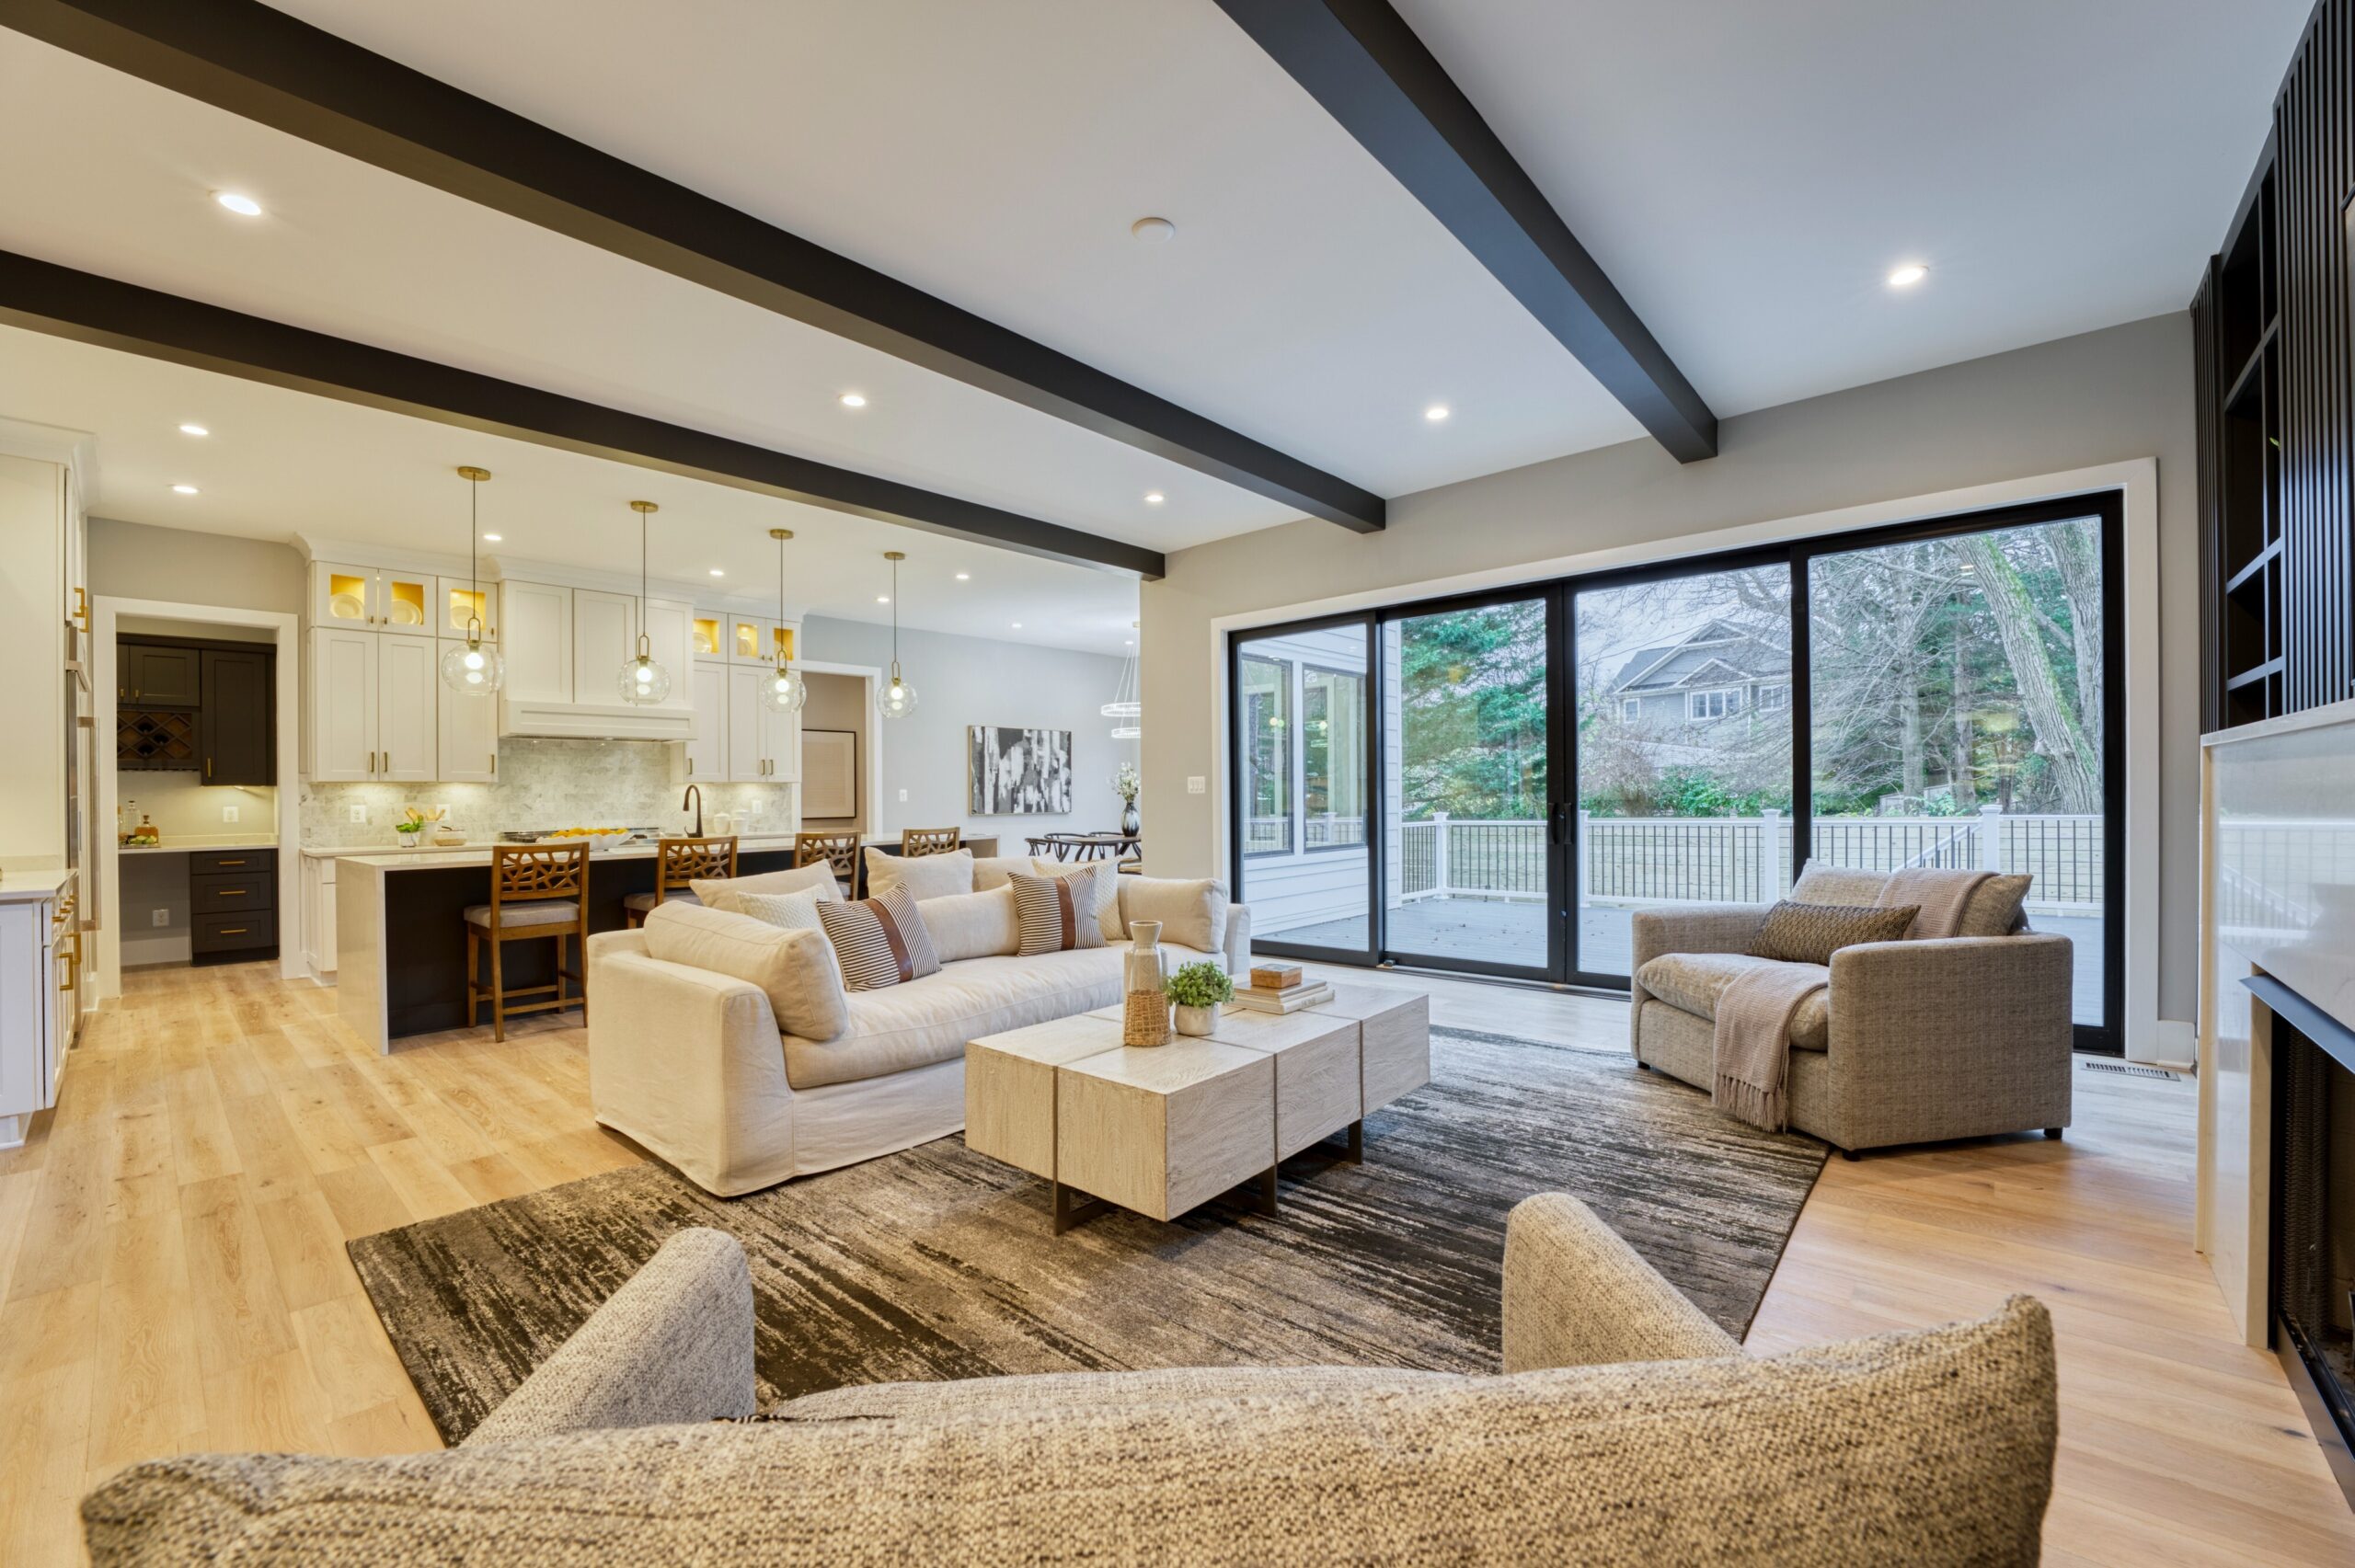 Professional interior photo of new construction home at 3400 N Ohio St - showing the open living room to kitchen with exposed black beams in the ceiling and a wall of floor to ceiling windows